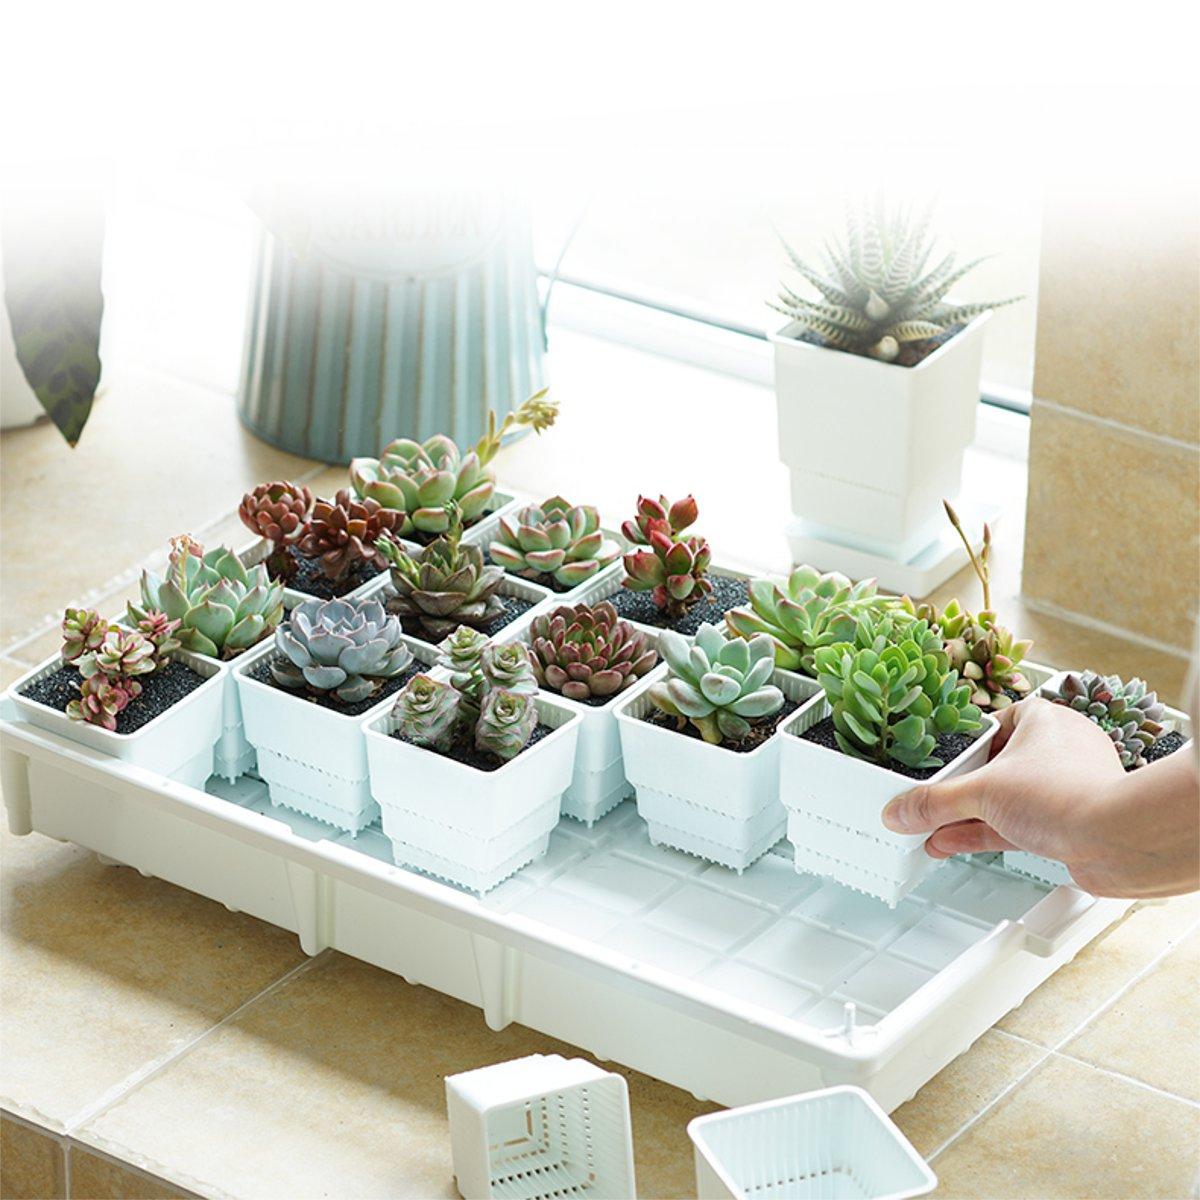 

PP Plant Tray Succulents Seedling Drain Balcony Growing Holder Nursery Garden Decorations